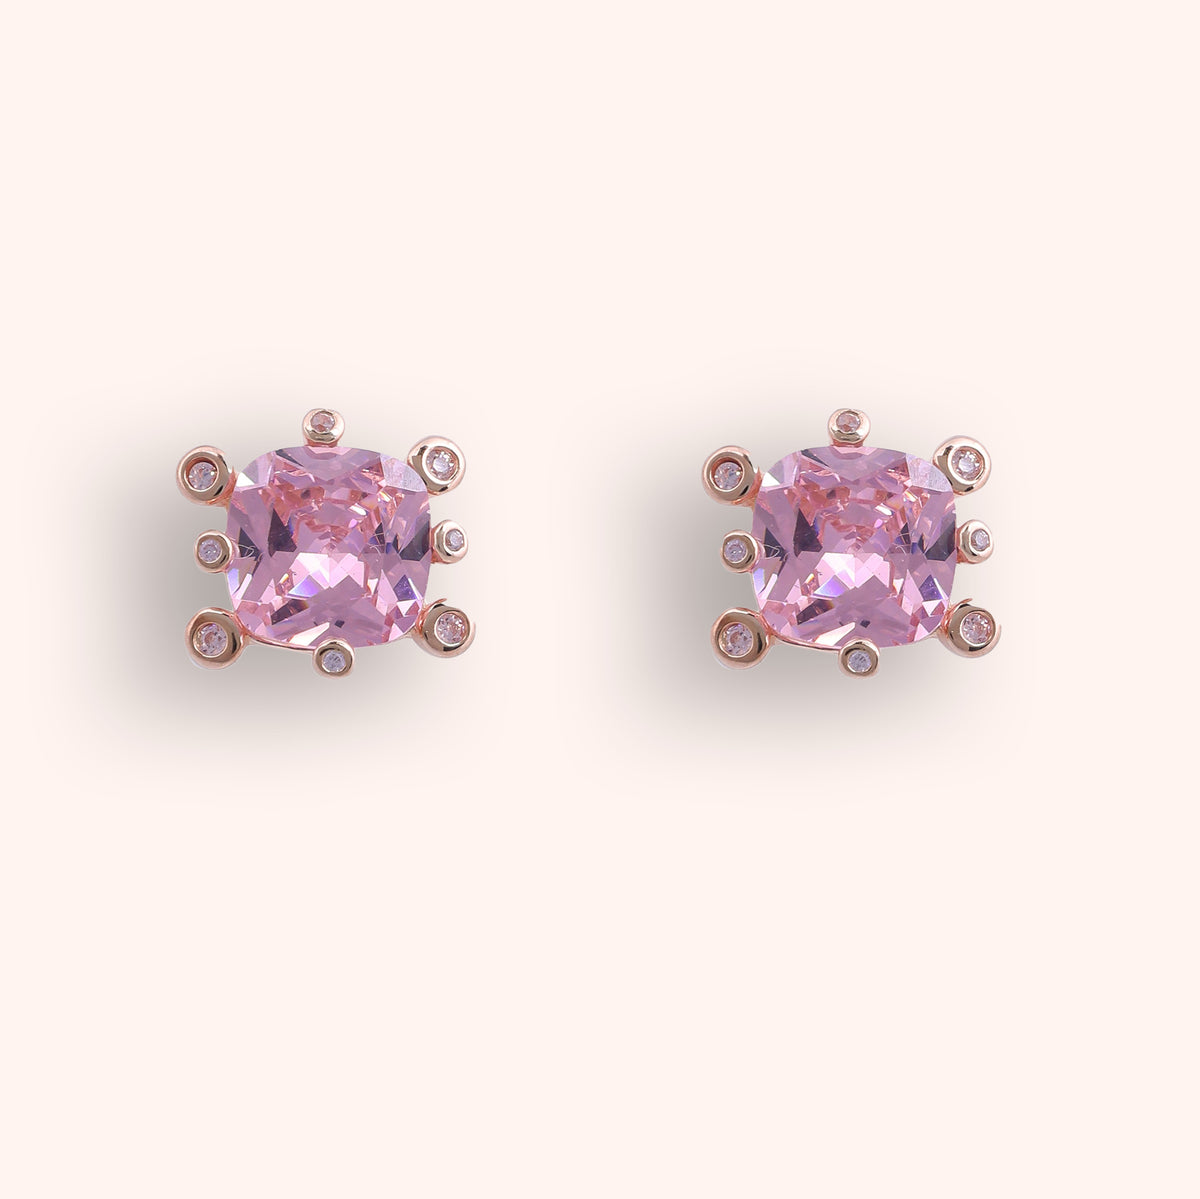 Victoria Solitare Rose Gold Studs Earrings